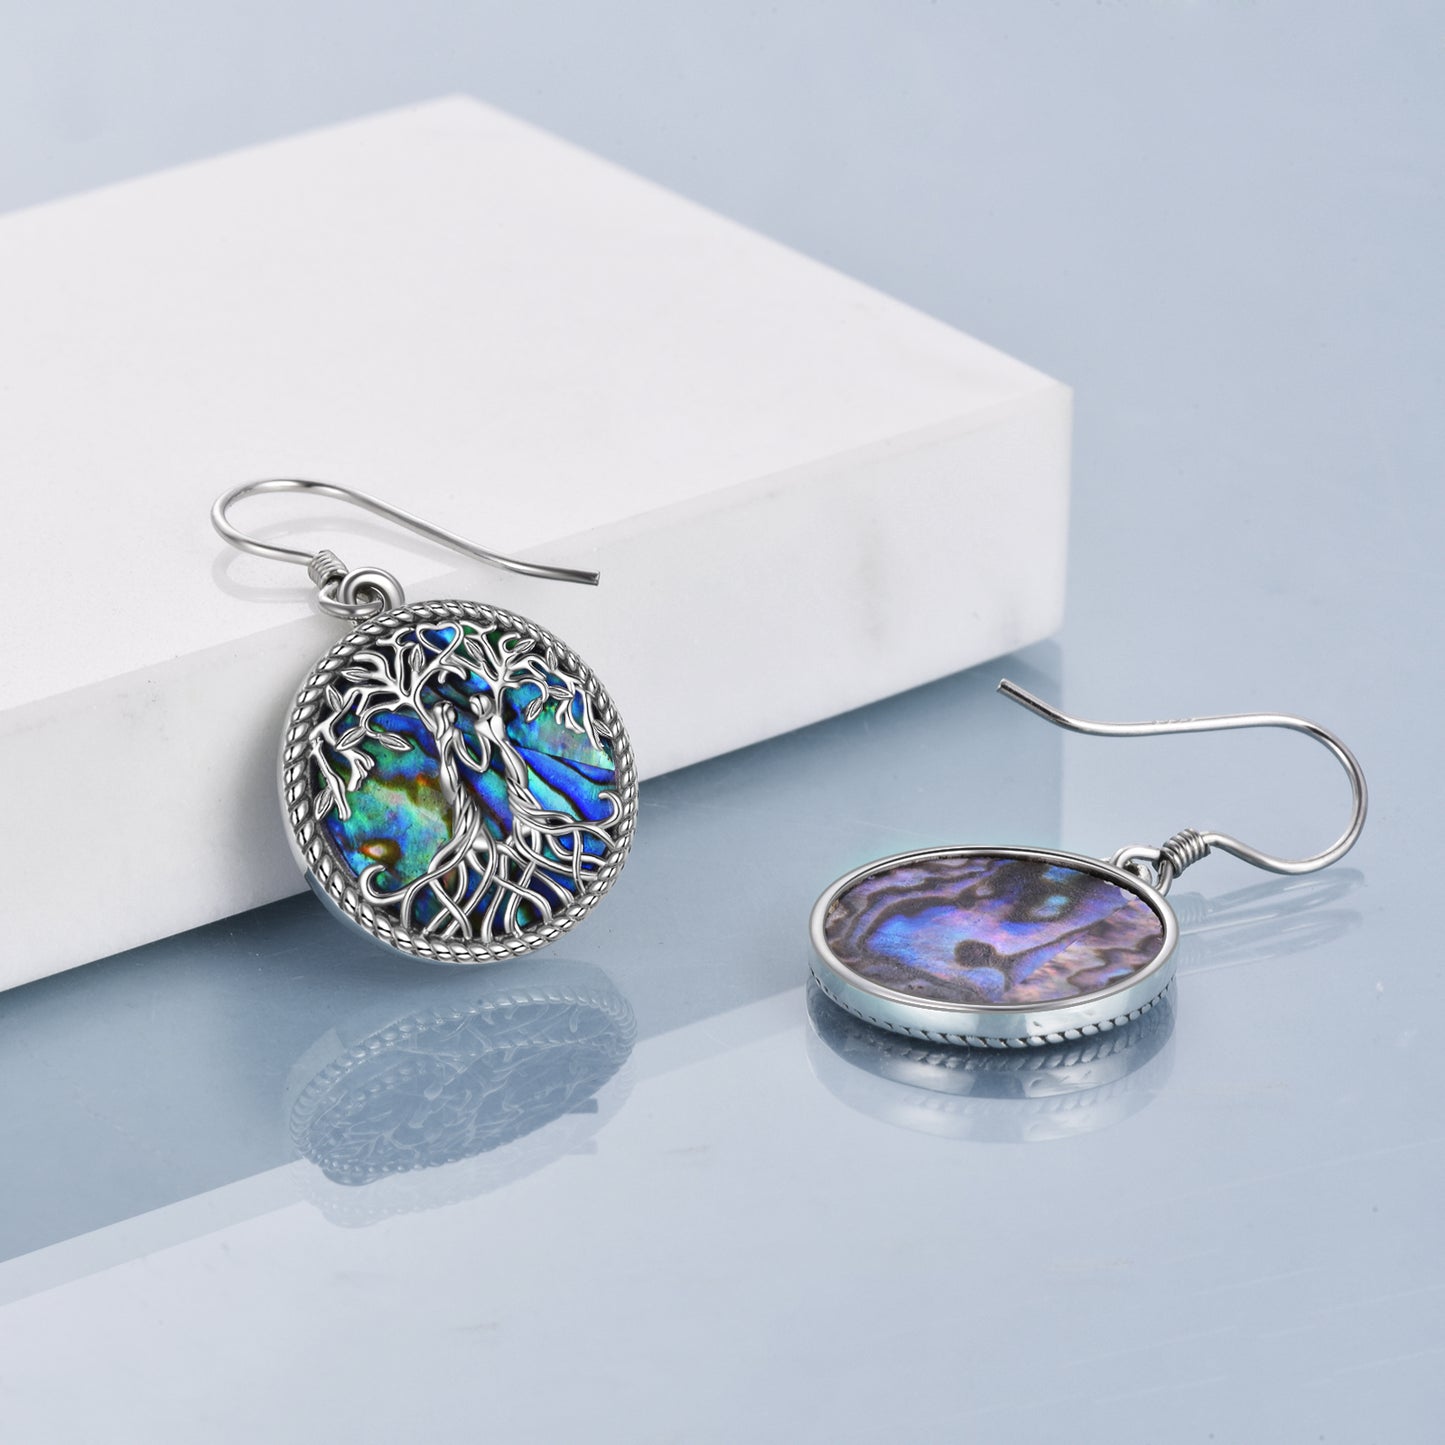 The Perfect Gift for Your Sister - Sterling Silver Earrings!